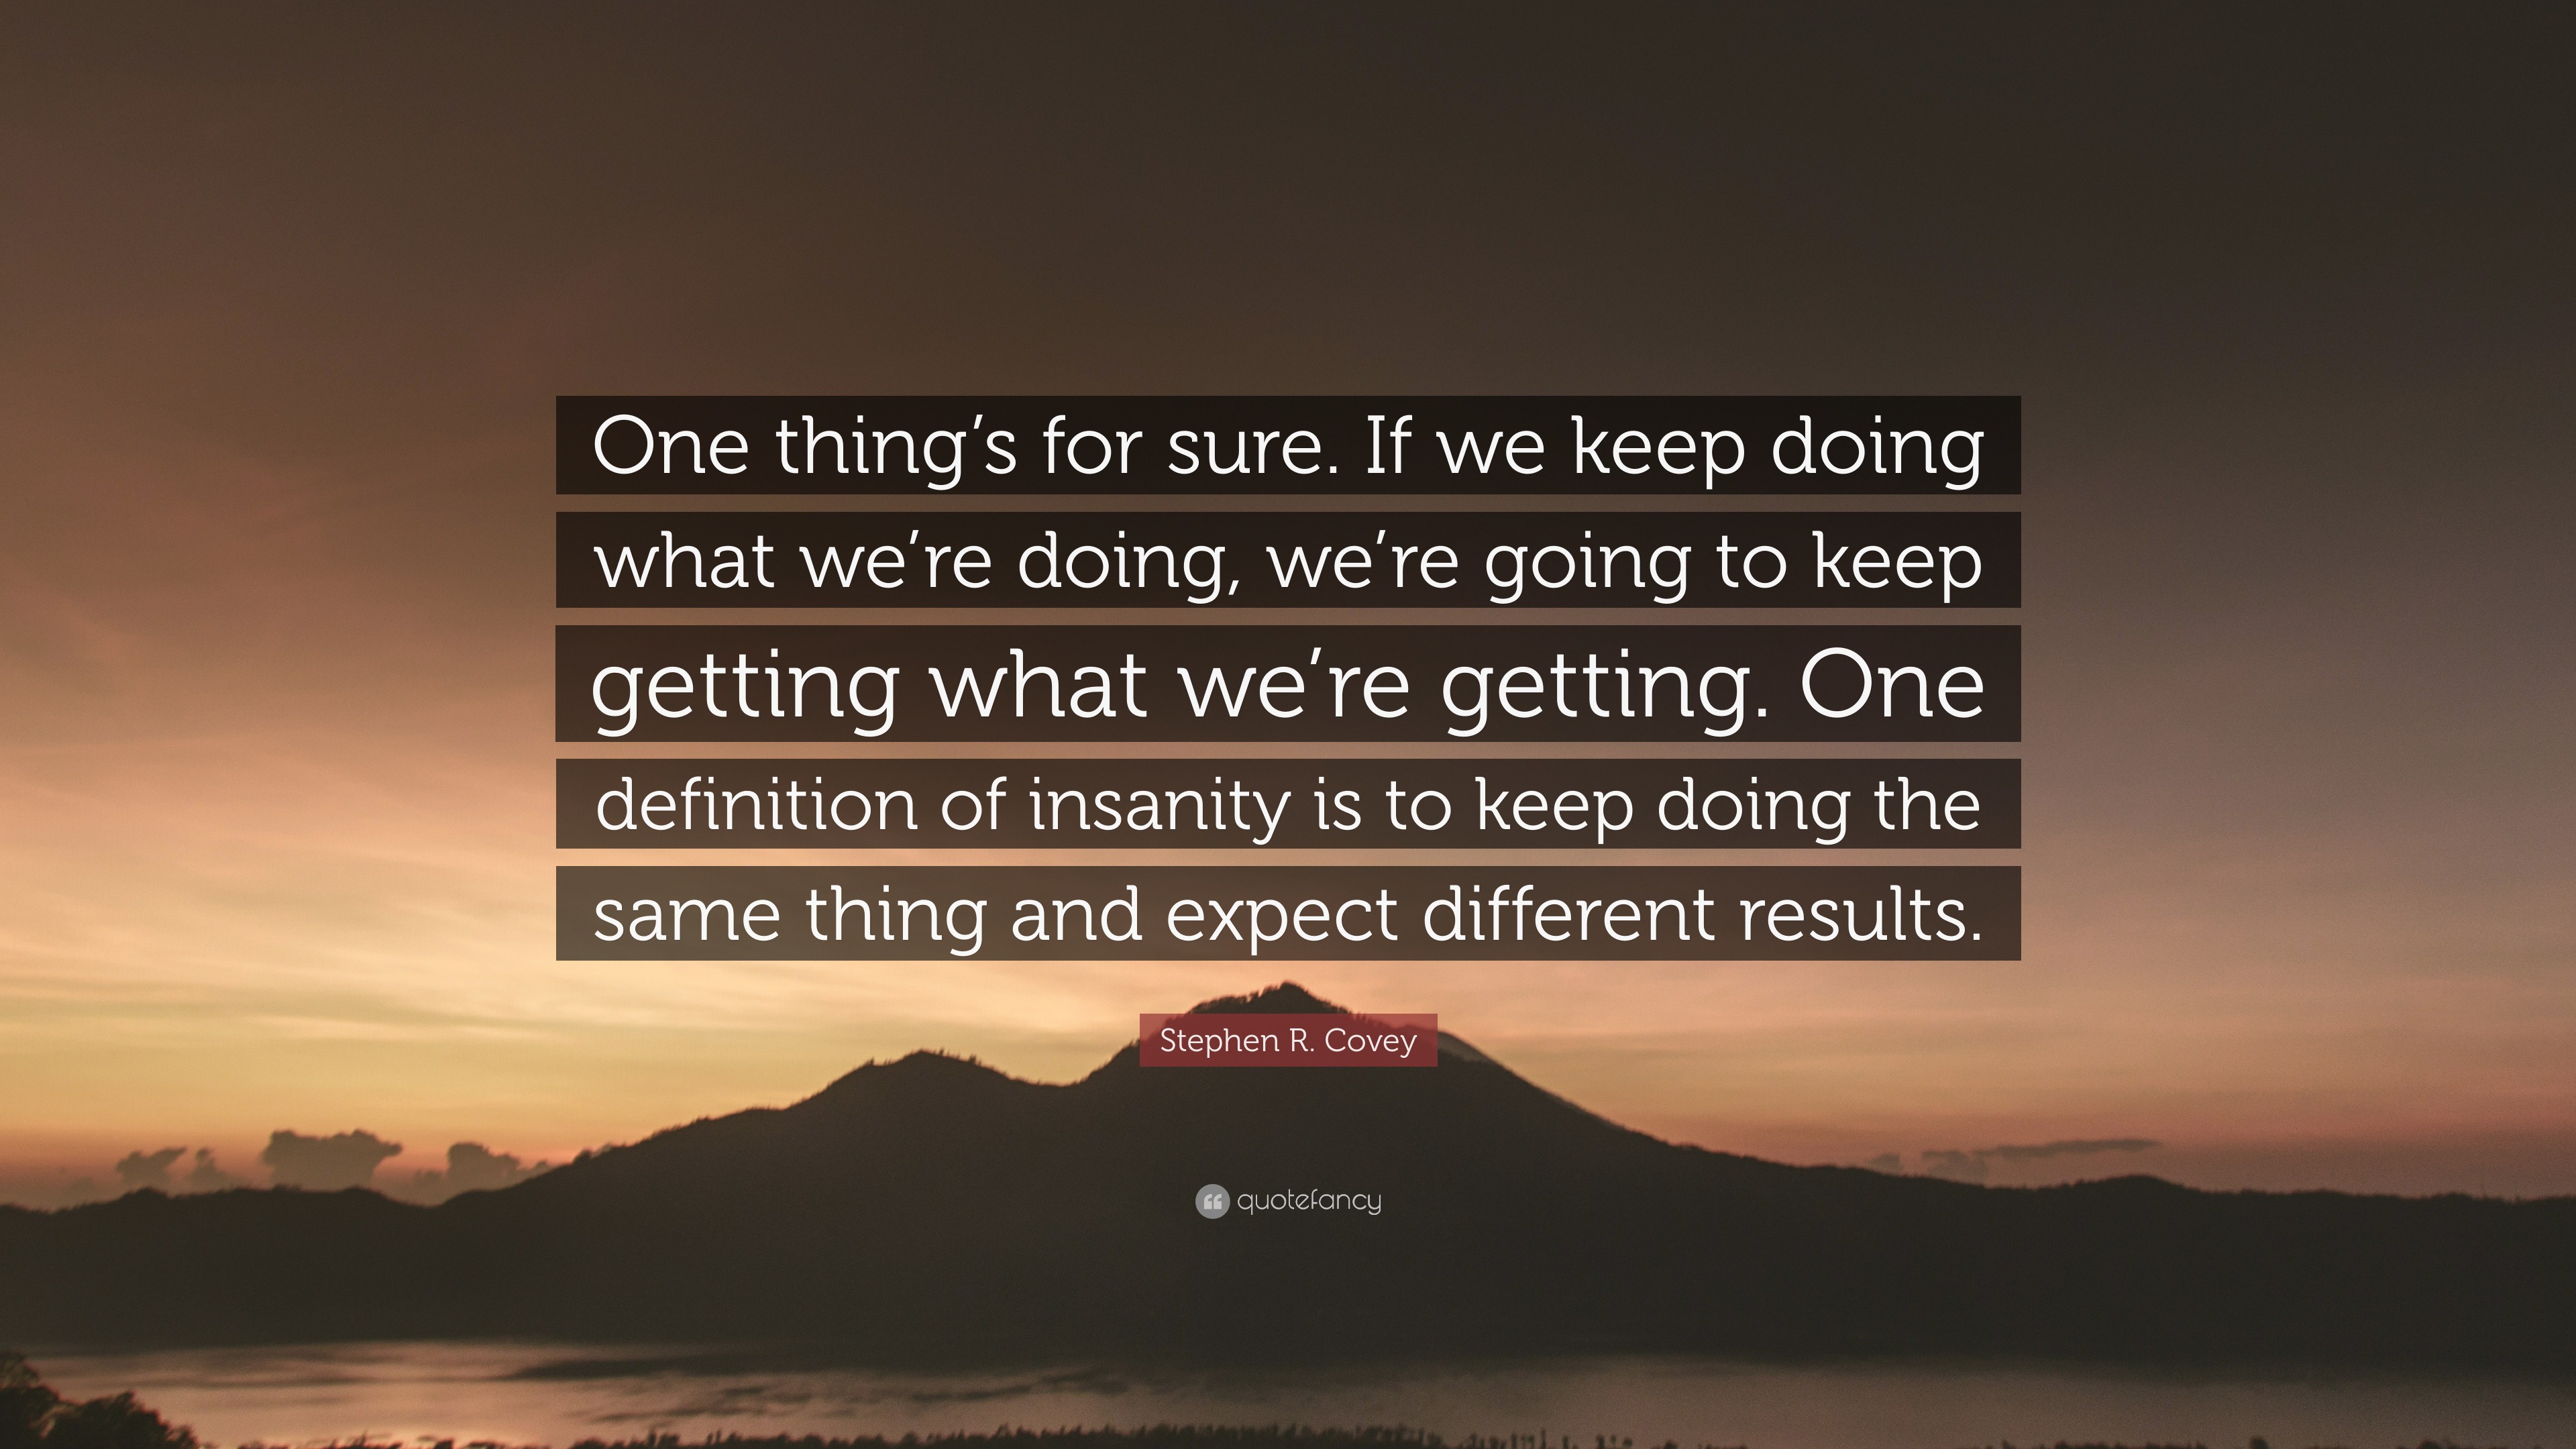 Stephen R Covey Quote “one Thing S For Sure If We Keep Doing What We Re Doing We Re Going To